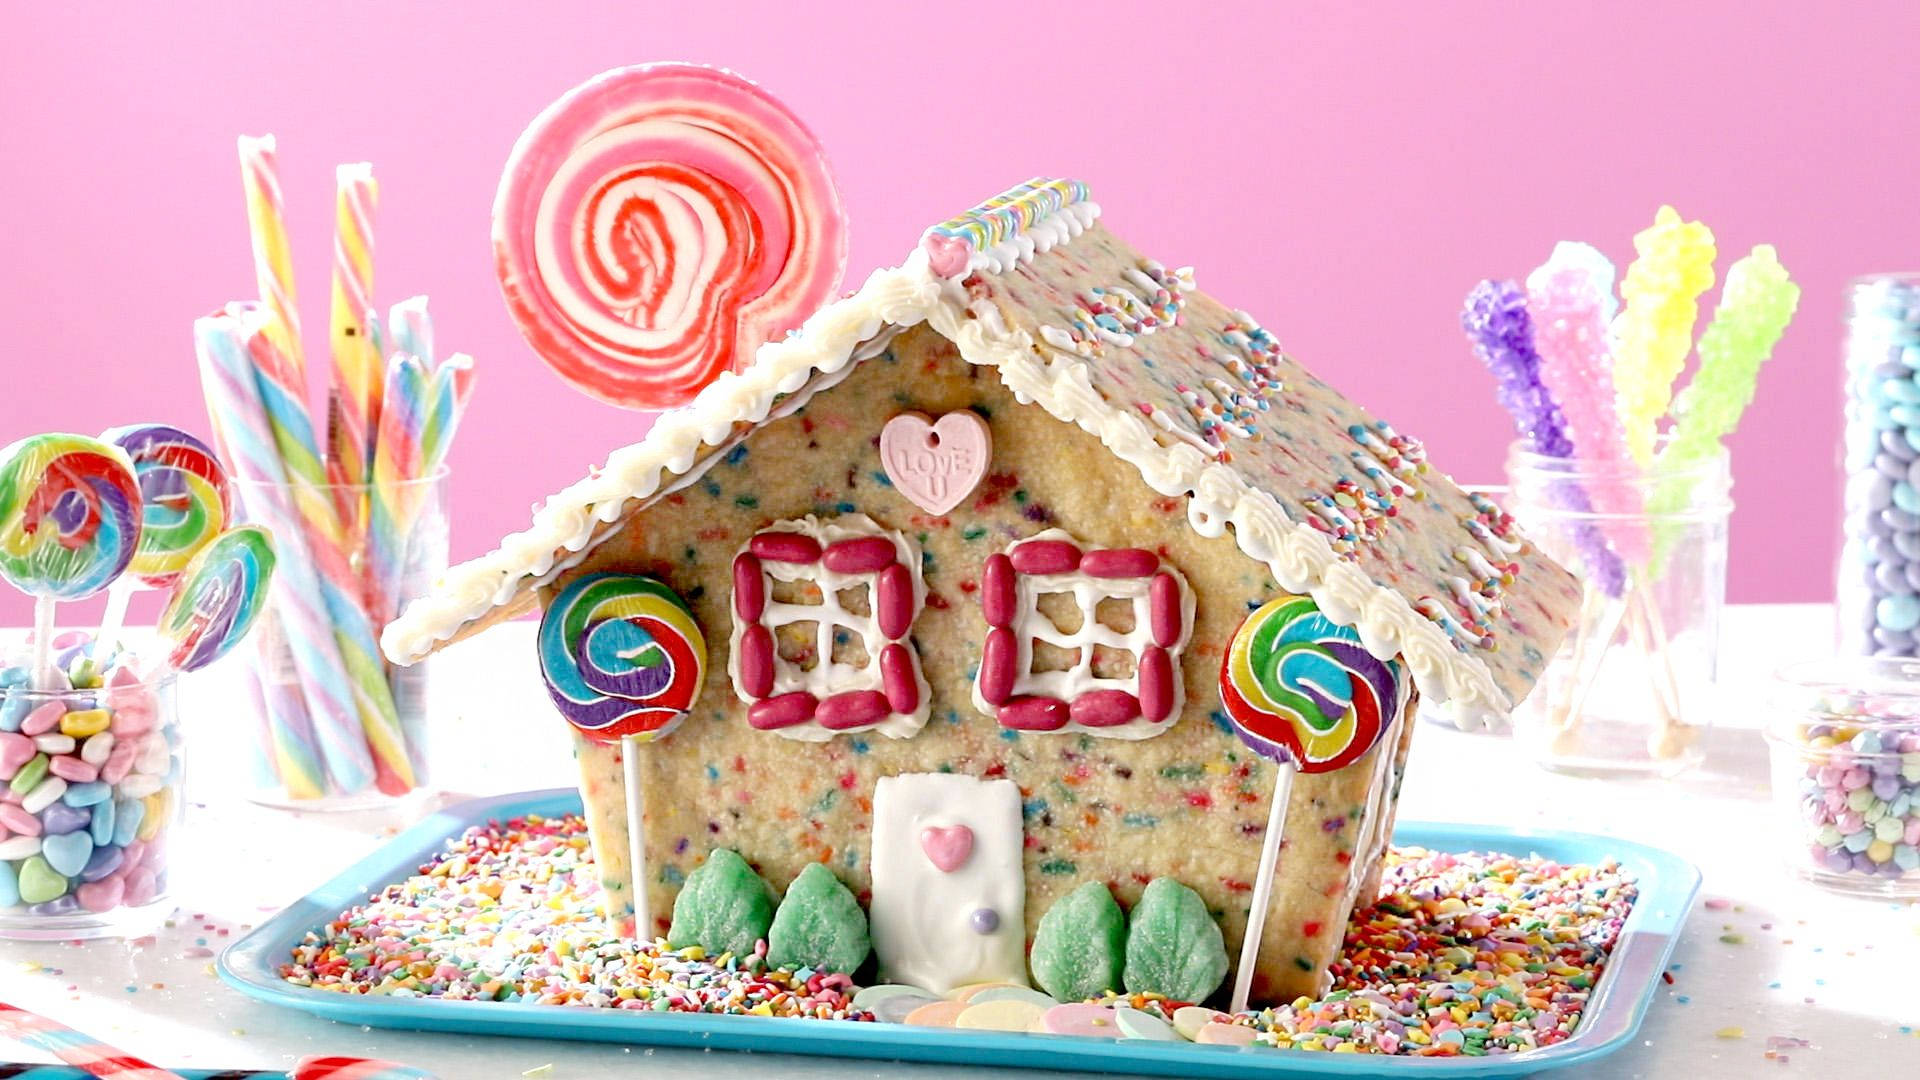 Girly Gingerbread House Theme Wallpaper